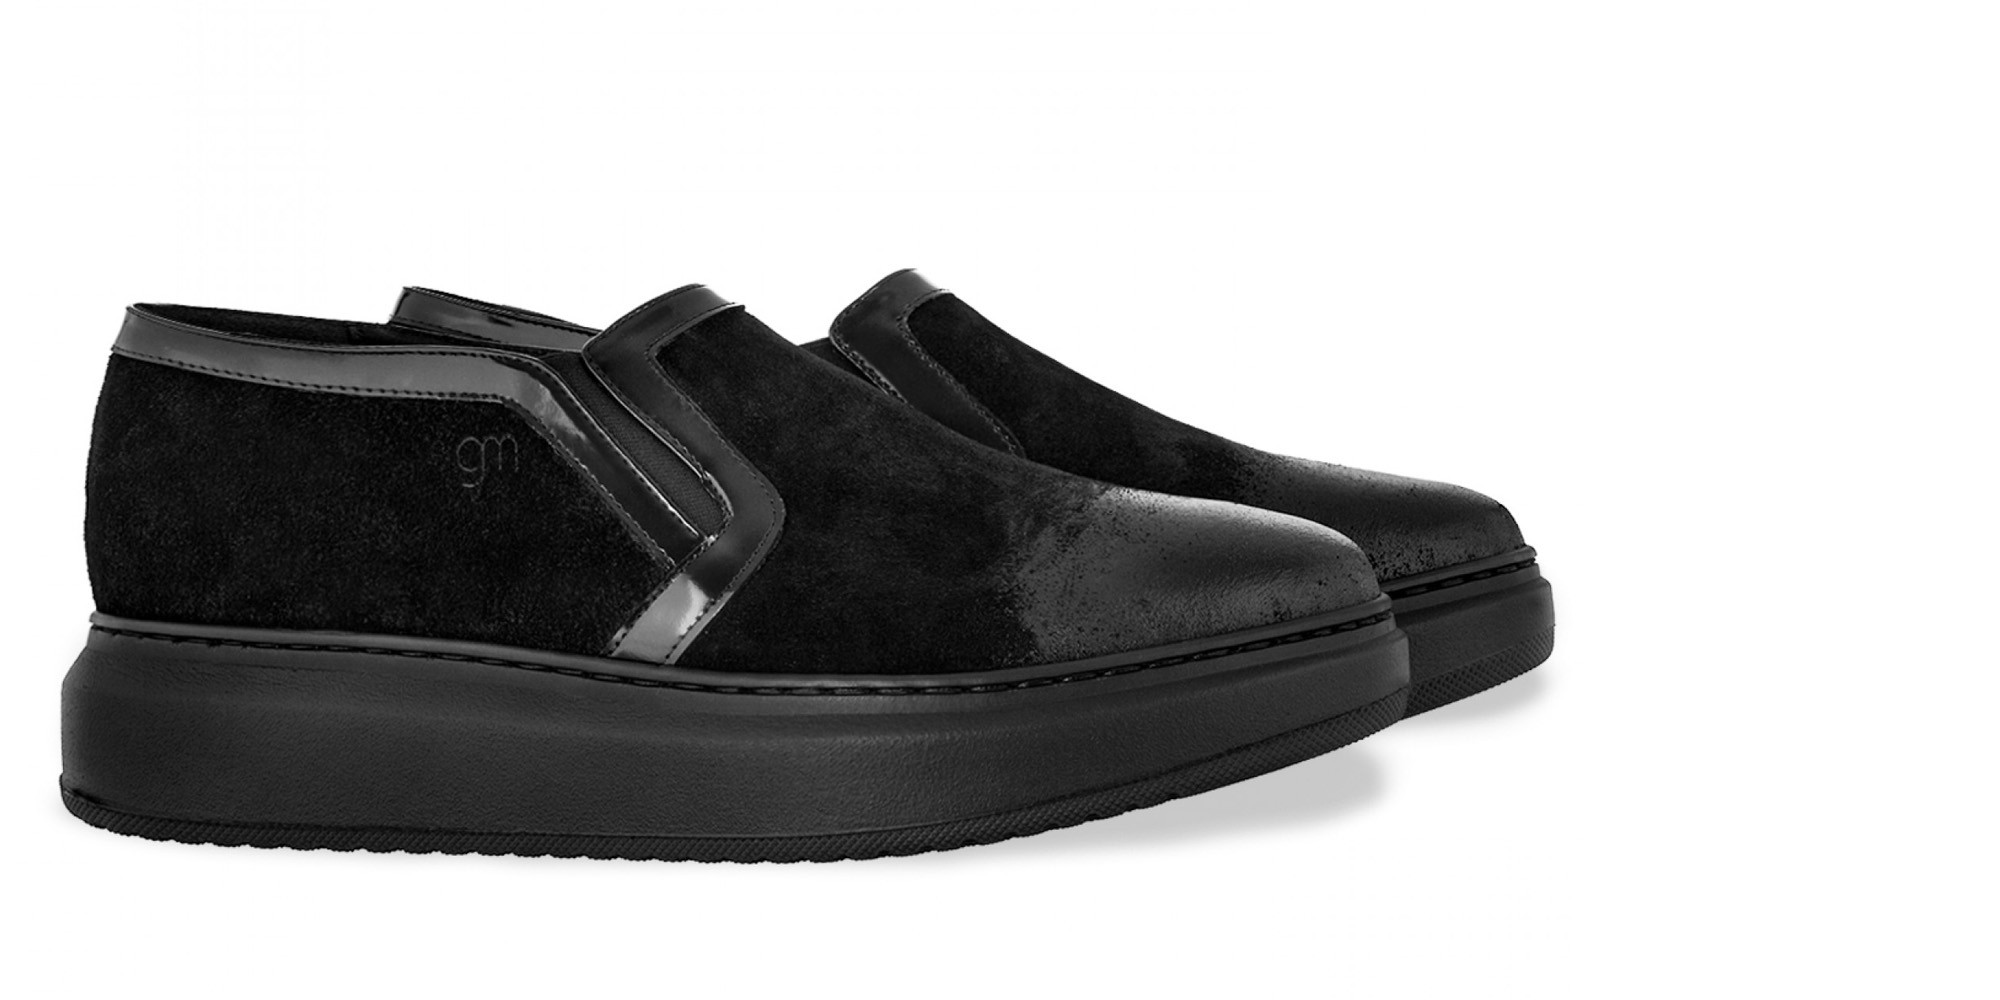 Sendai - Elevator Slip-Ons in Suede Leather up to 2.6 inches